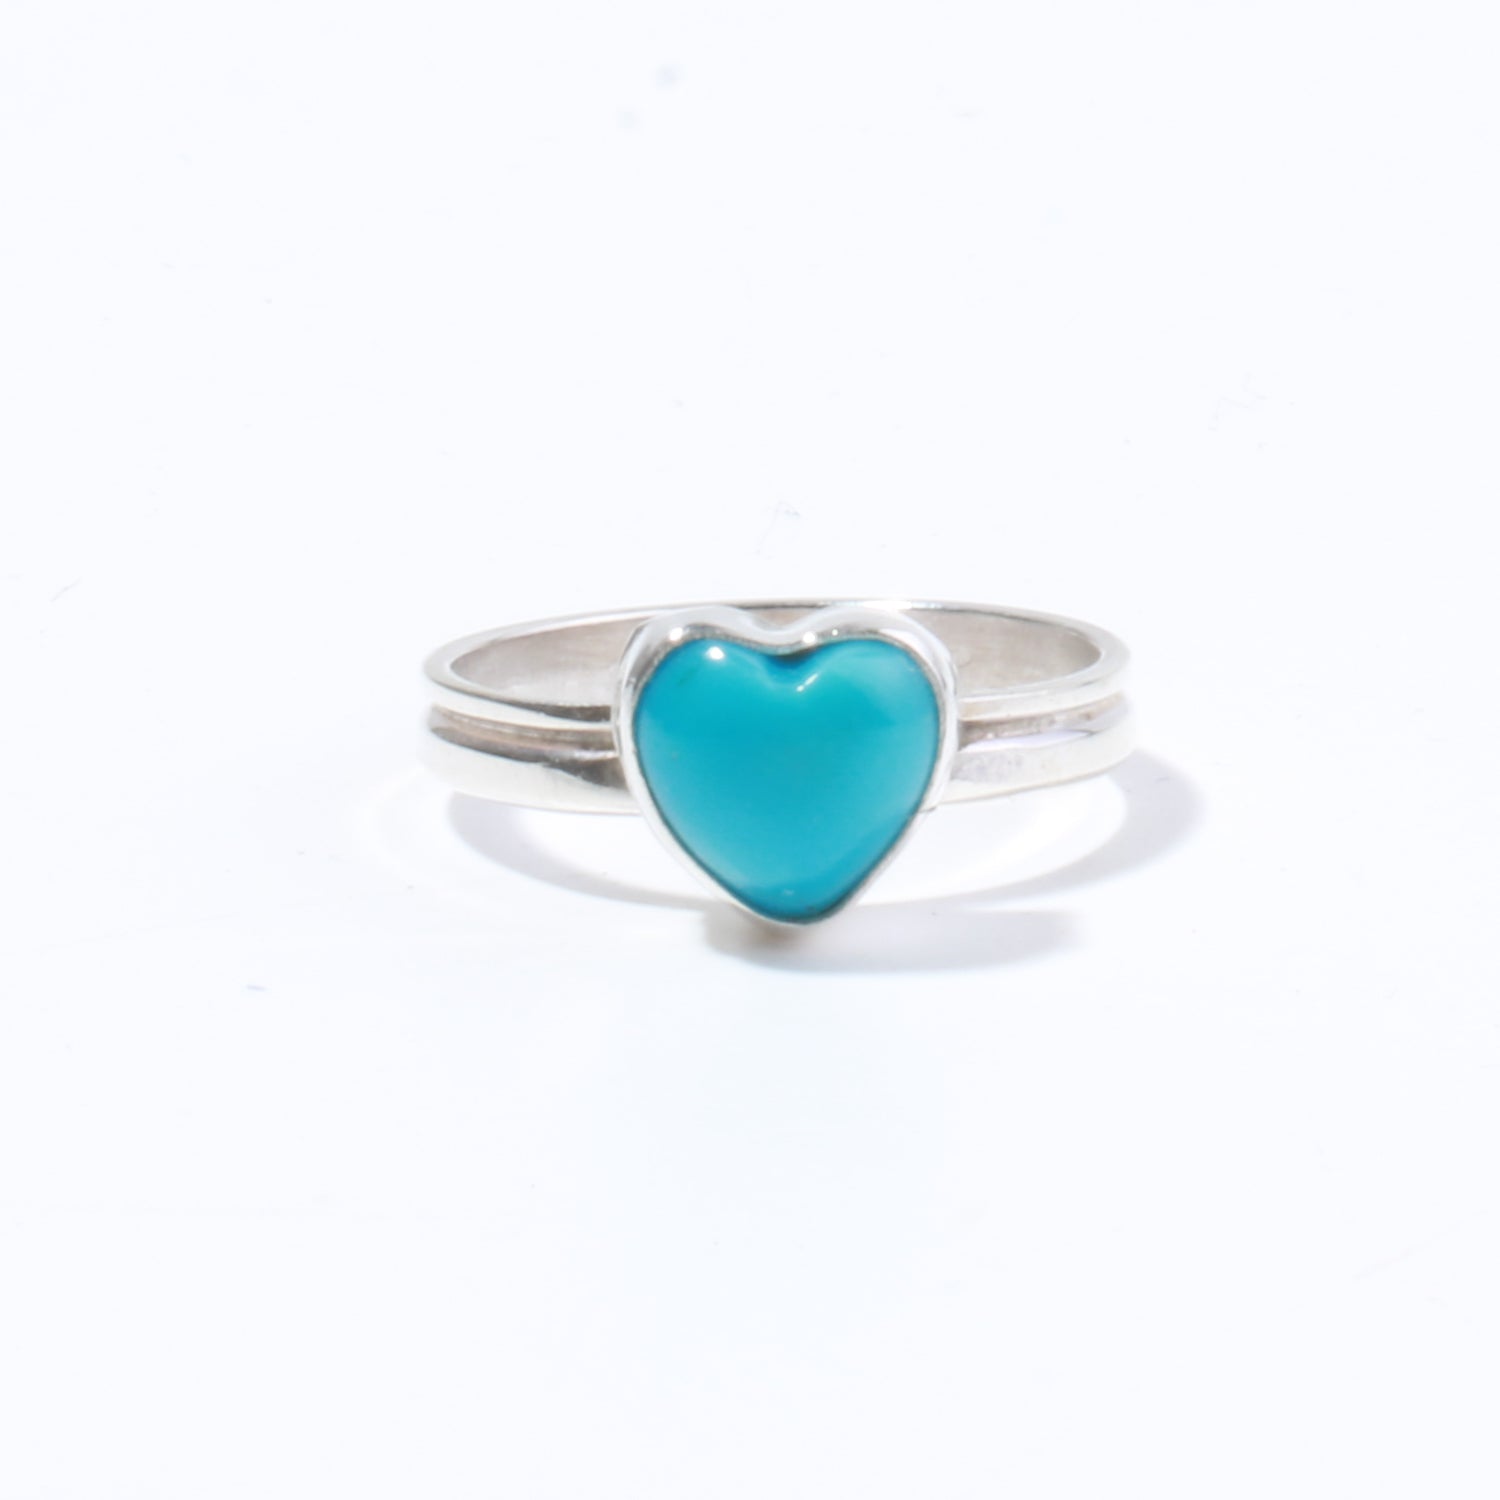 Heart Turquoise Ring (by Mildred Parkhurst)